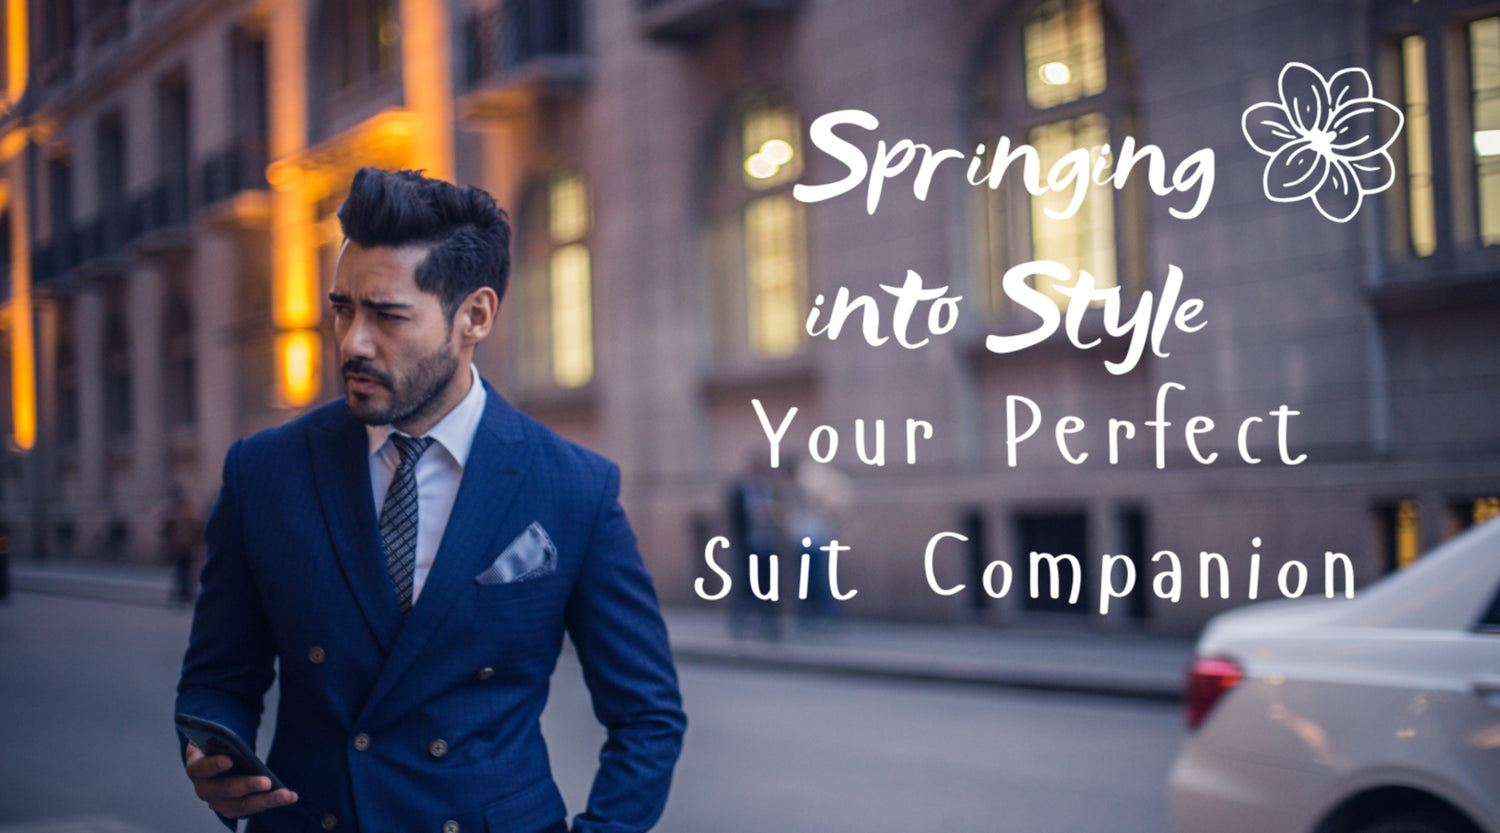 Springing into Style: Your Perfect Suit Companion